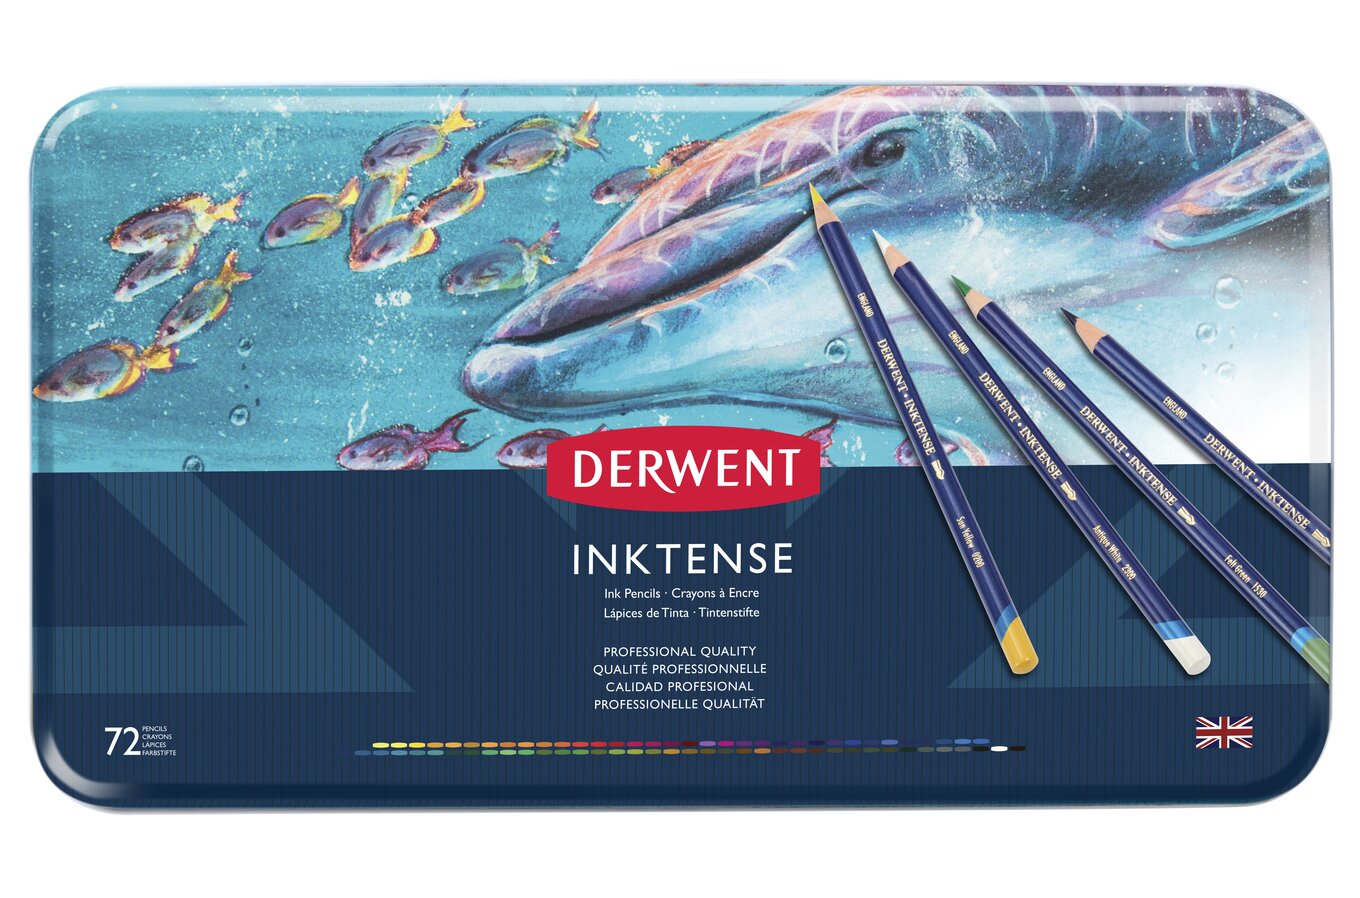 Derwent Inktense Pencils Tin, Set of 12, Great for Holiday Gifts, 4mm Round  Core, Firm Texture, Watersoluble, Ideal for Watercolor, Drawing, Coloring